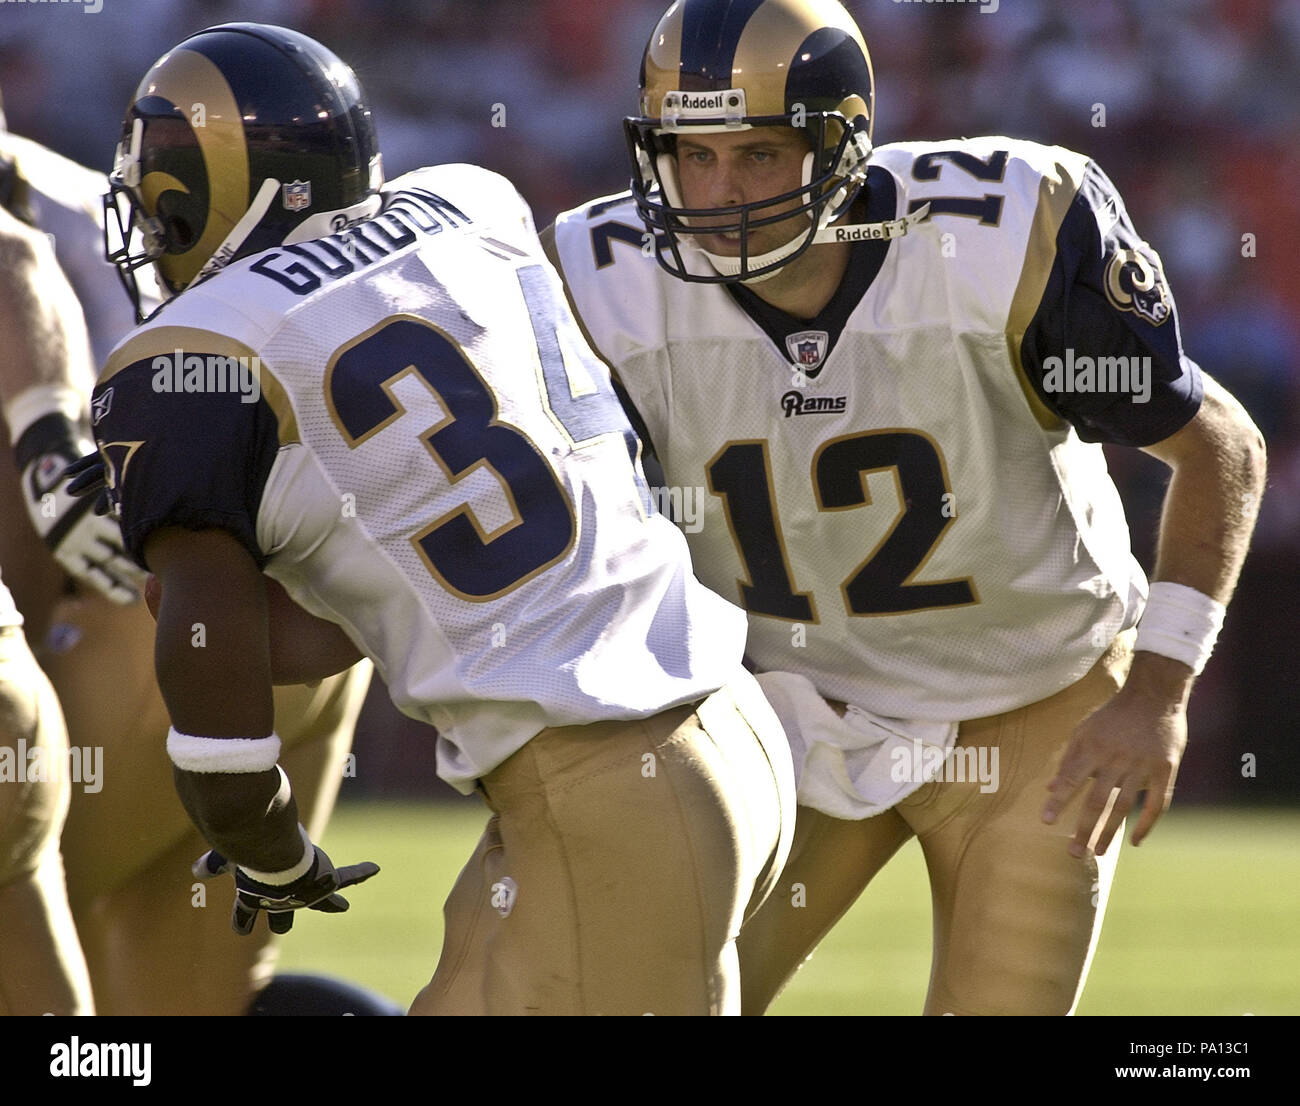 Supe's On: The History of the Rams Football Uniforms (1973-2018)